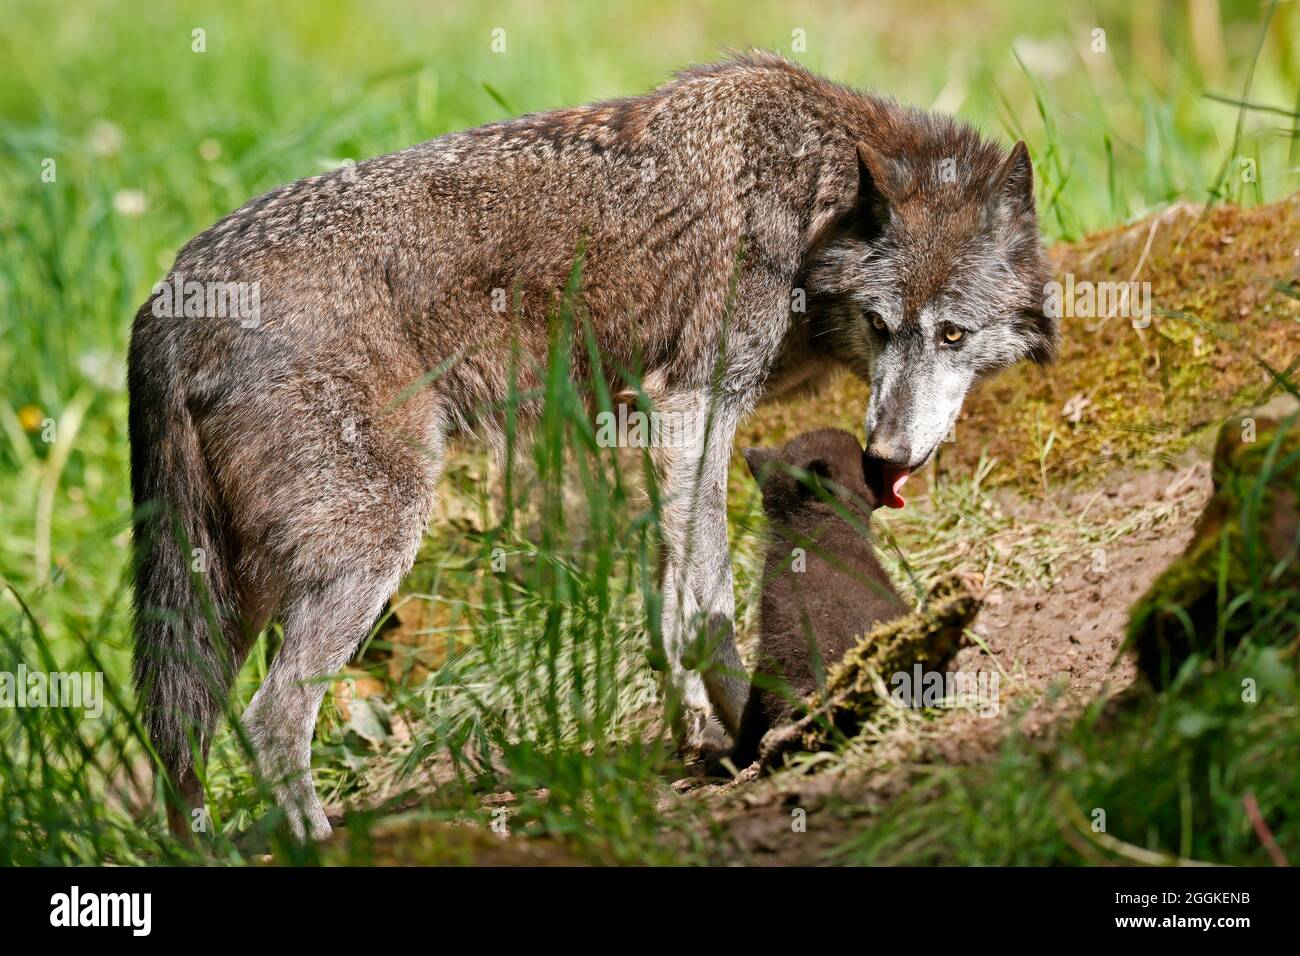 Timber wolf, American wolf (Canis lupus occidentalis), puppy with old animal at burrow, Germany Stock Photo